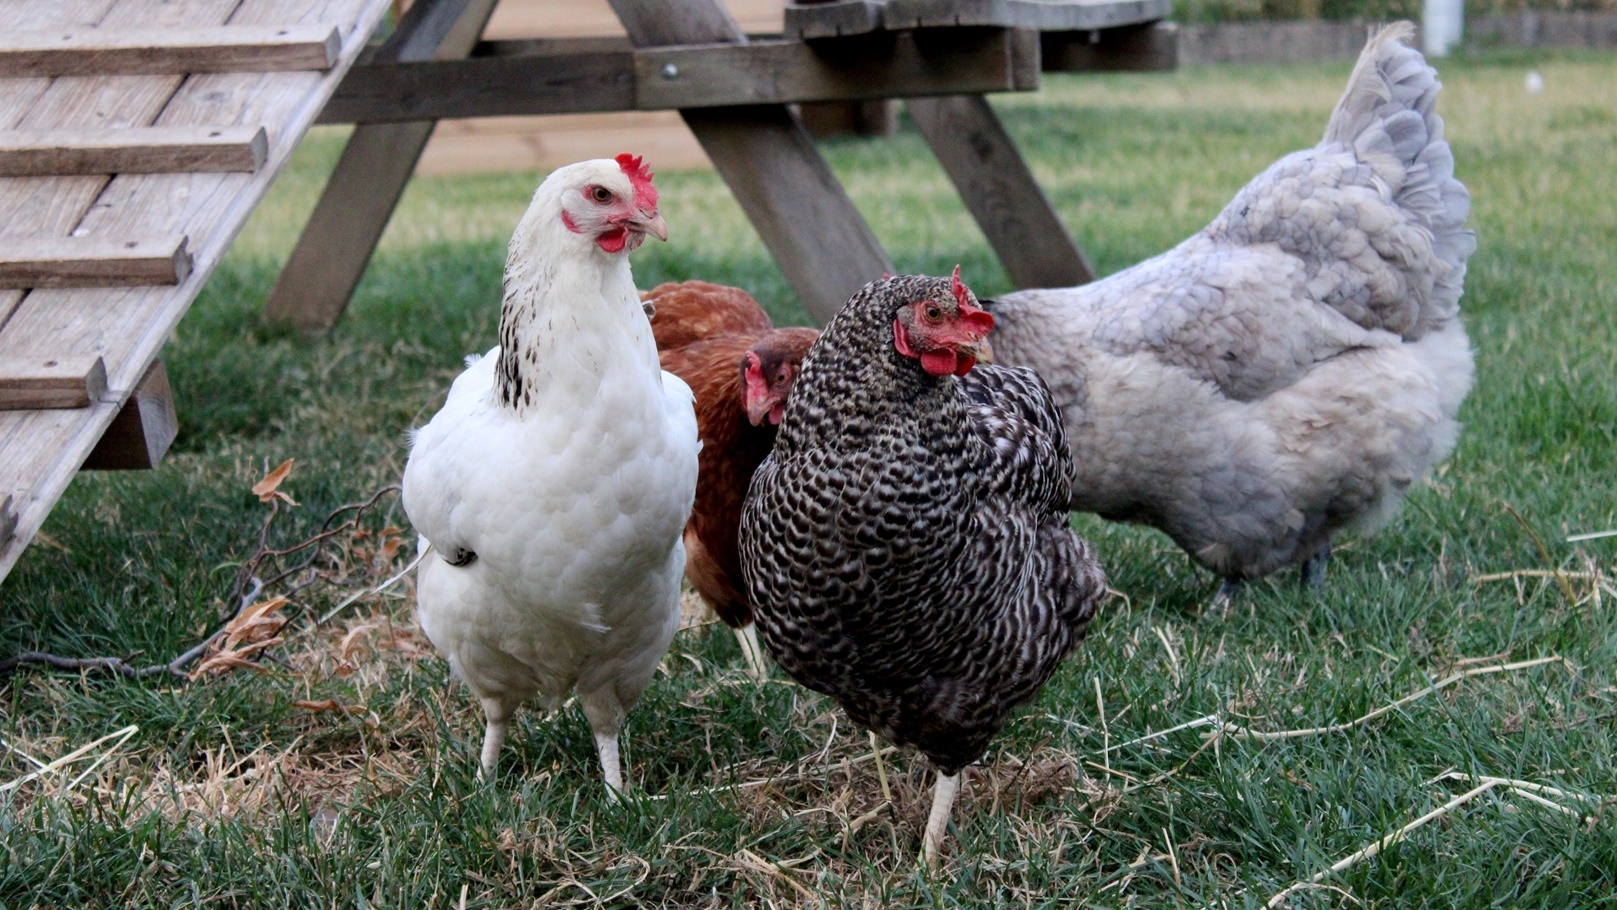 four-chickens-in-the-grass-on-the-farm-hens-po-2021-09-02-09-35-22-utc